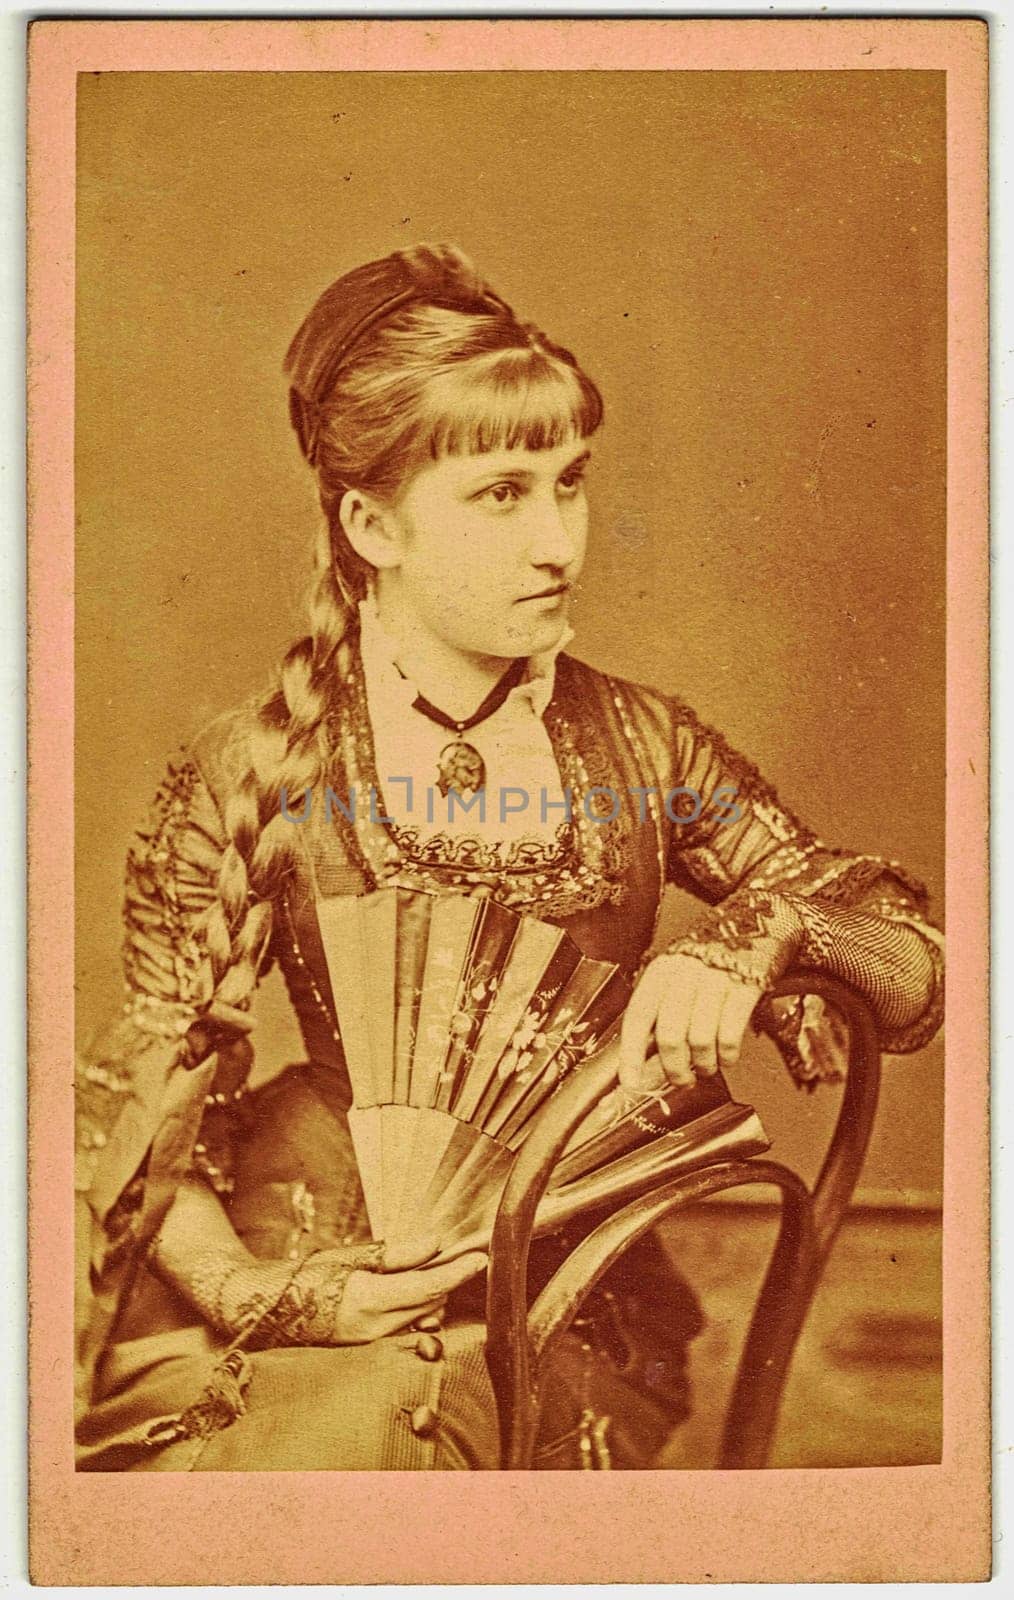 Vintage cabinet card shows portrait of the young girl 20 years old . Photo was taken in a photo studio. Edwardian hairstyle. Photo was taken in Austro-Hungarian Empire or also Austro-Hungarian Monarchy. by roman_nerud